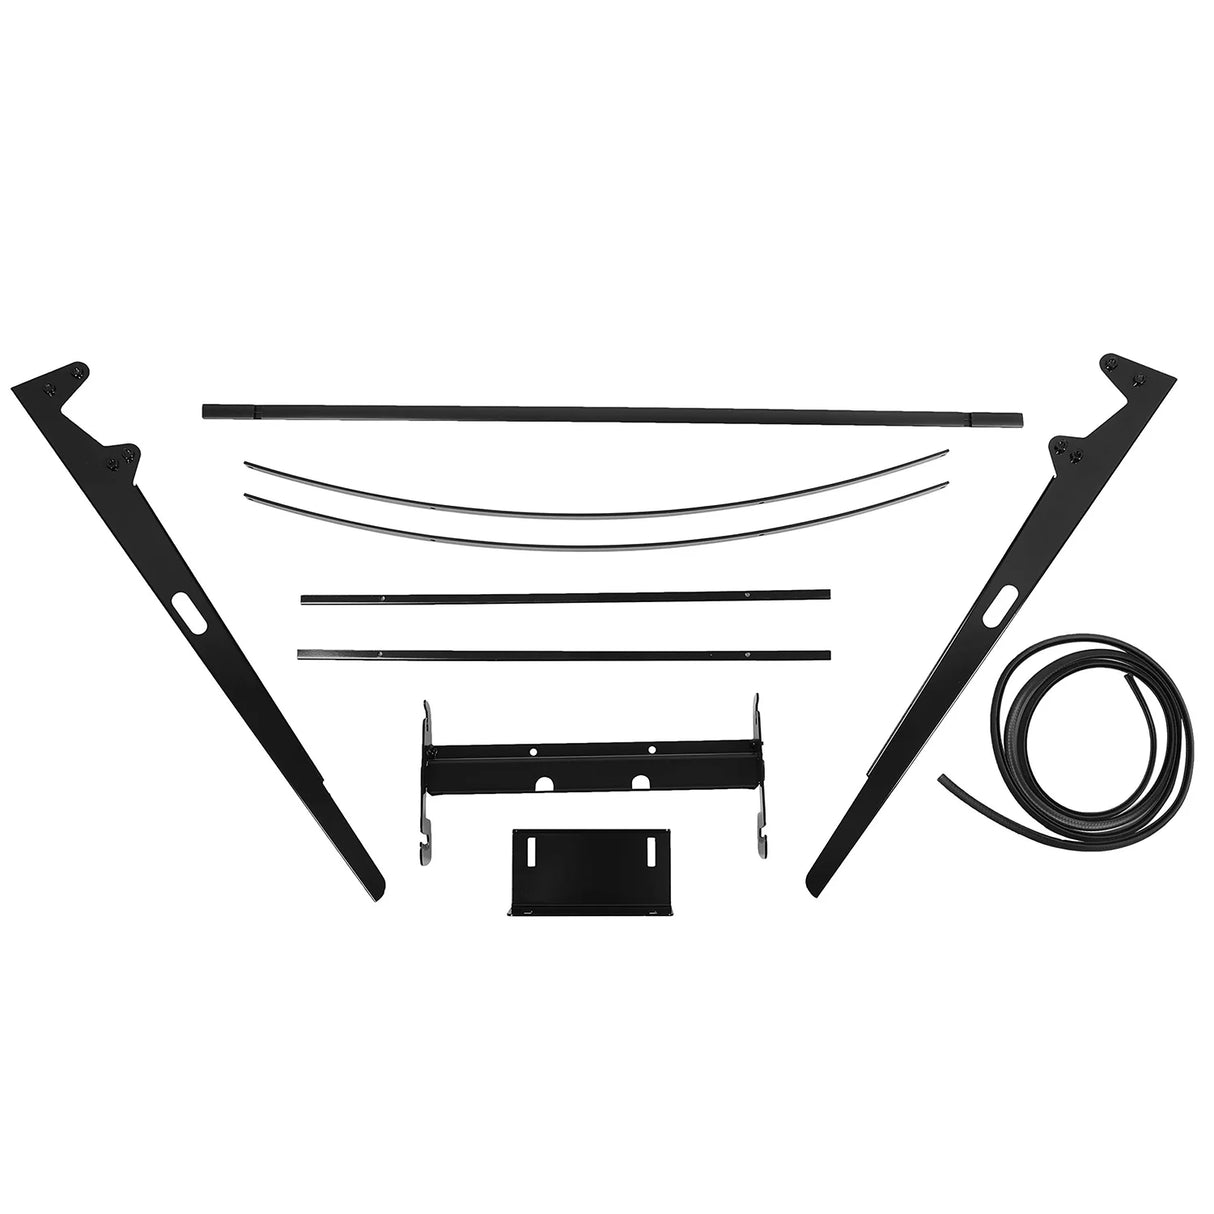 White Tractor Canopy Compatible with All ROPS 48-3/8" X 48-3/8" Equipped Tractors and Mowers with a 2" x 2" or 2" x 3" ROPS (Will Add About 4" to The Height of The Tractor)